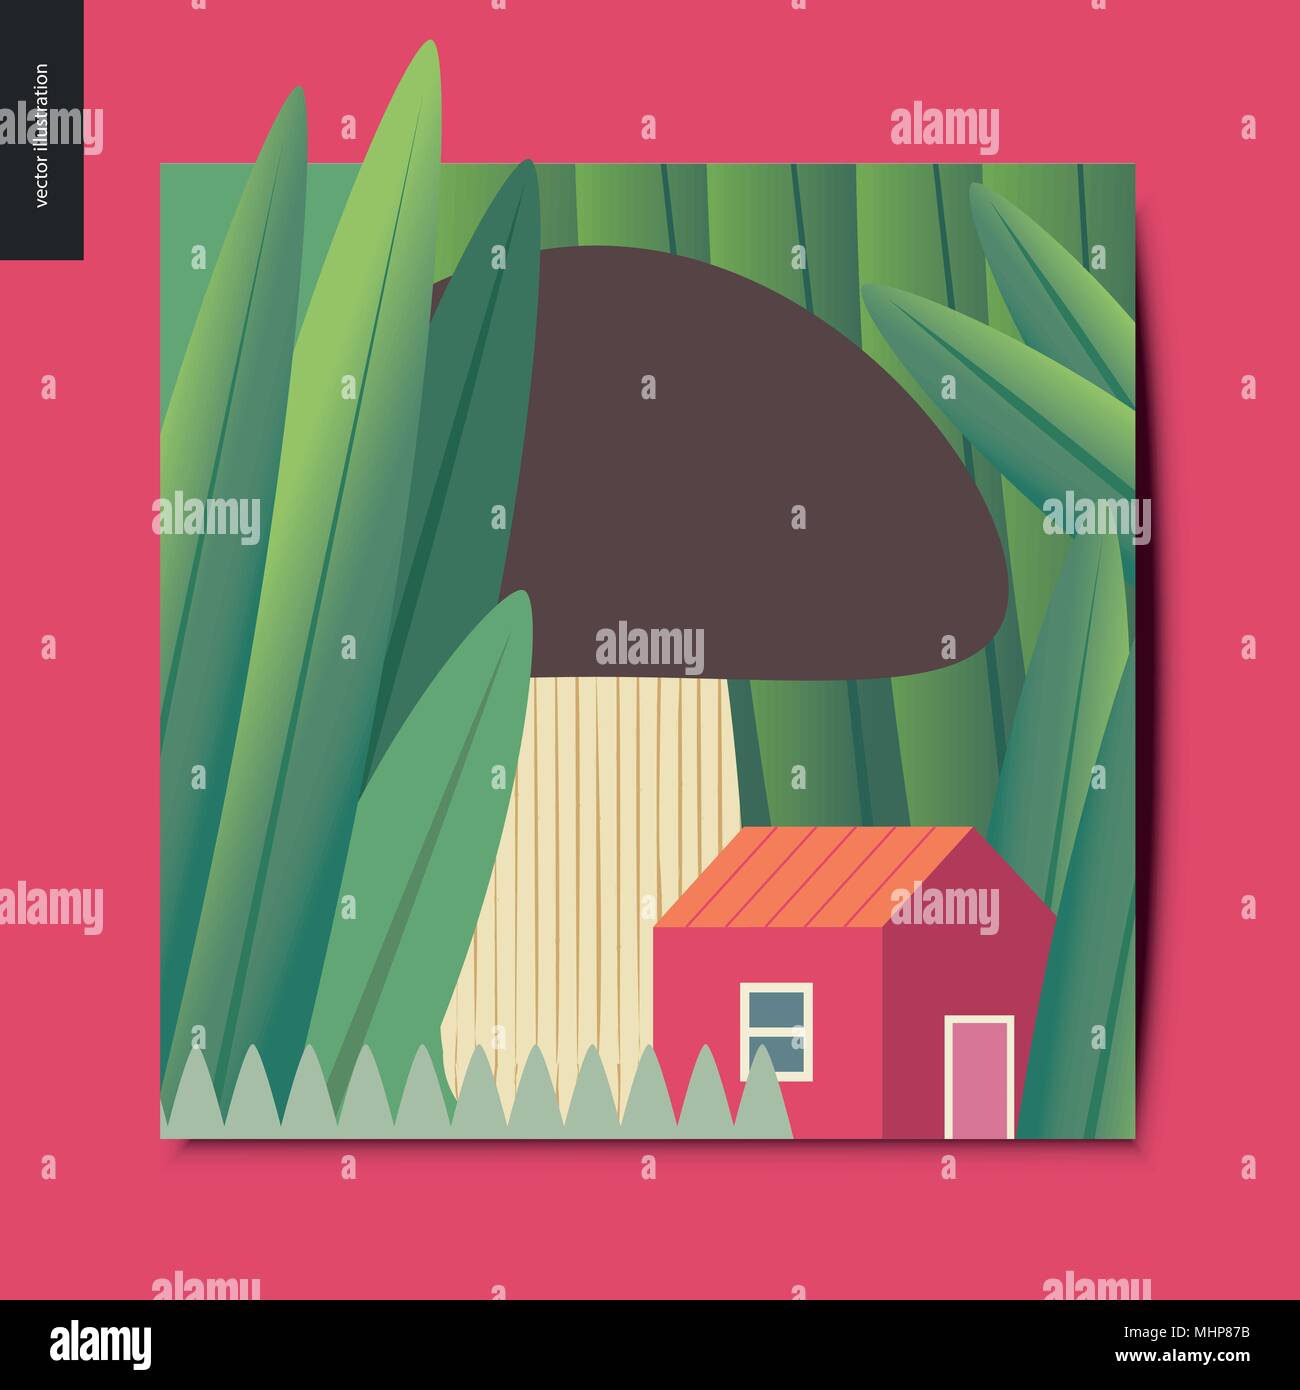 Simple things - concept illustration of a tiny red house under the mushroom growing among huge grass trunks, summer postcard, vector illustration Stock Vector